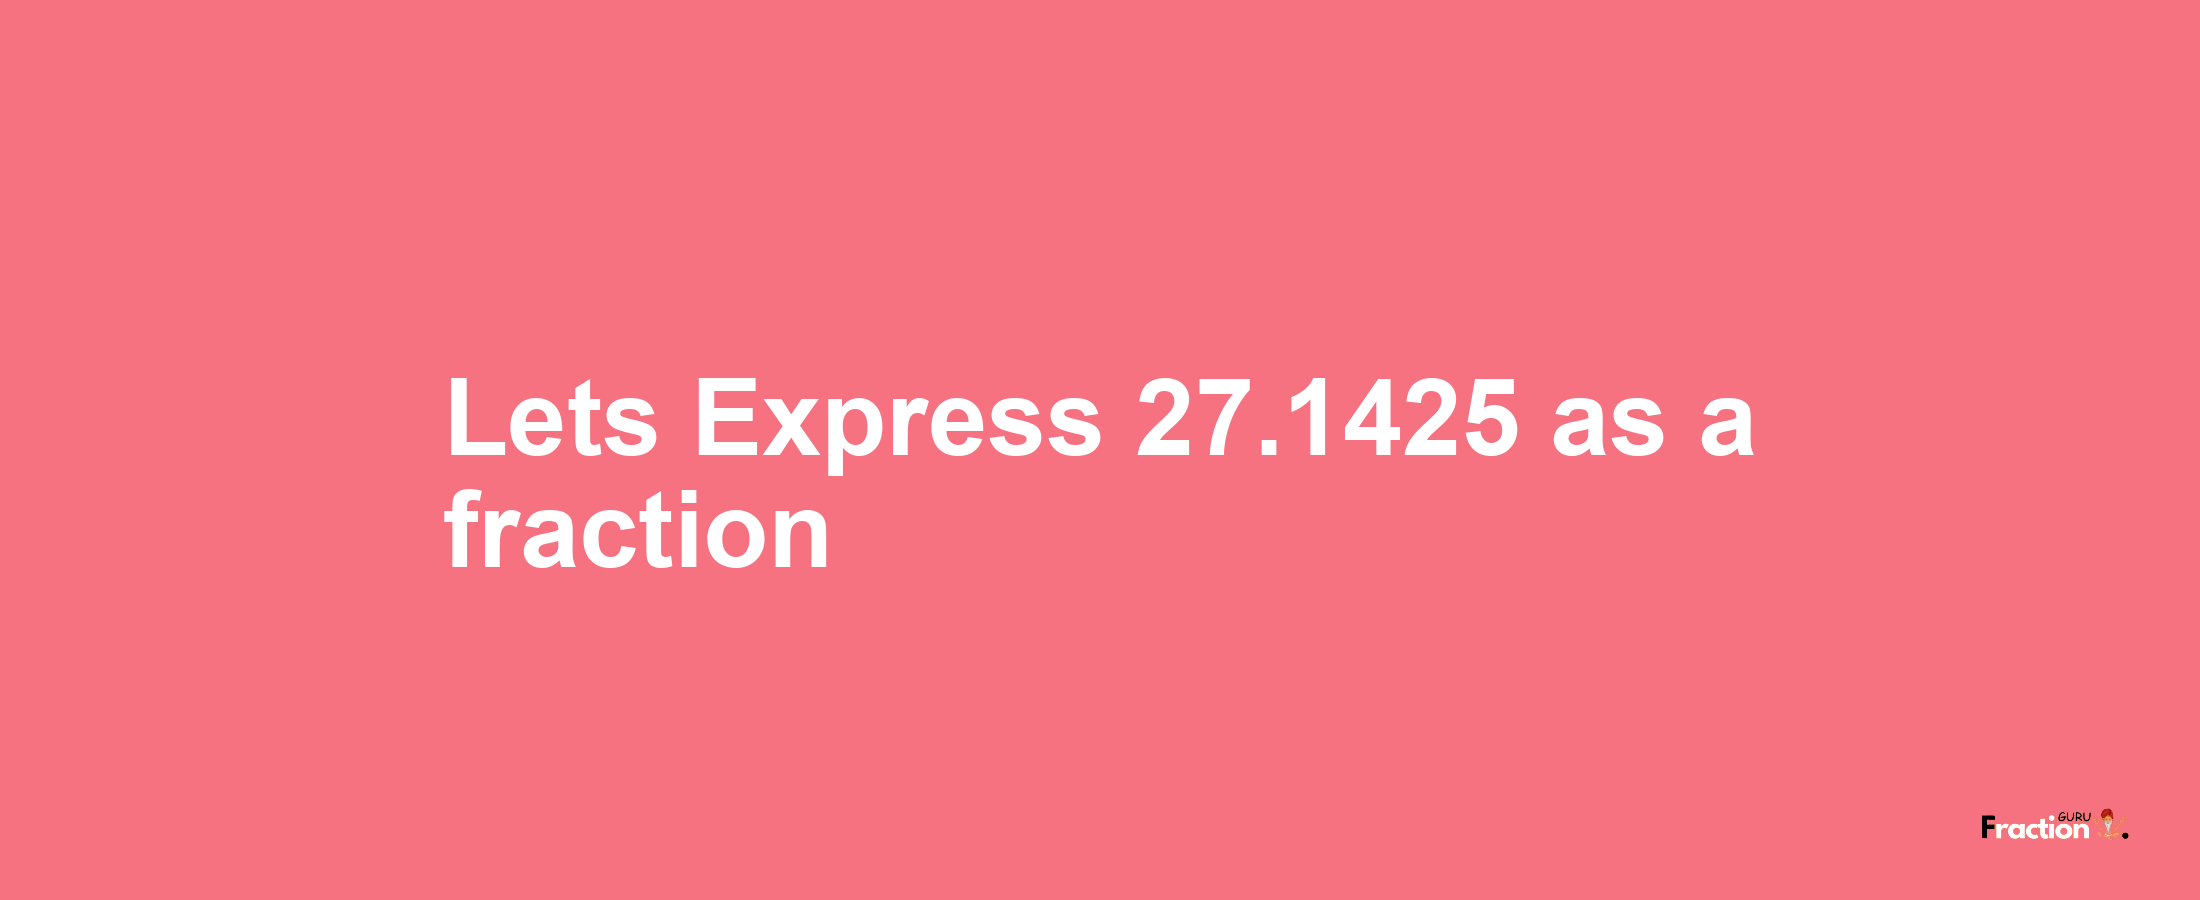 Lets Express 27.1425 as afraction